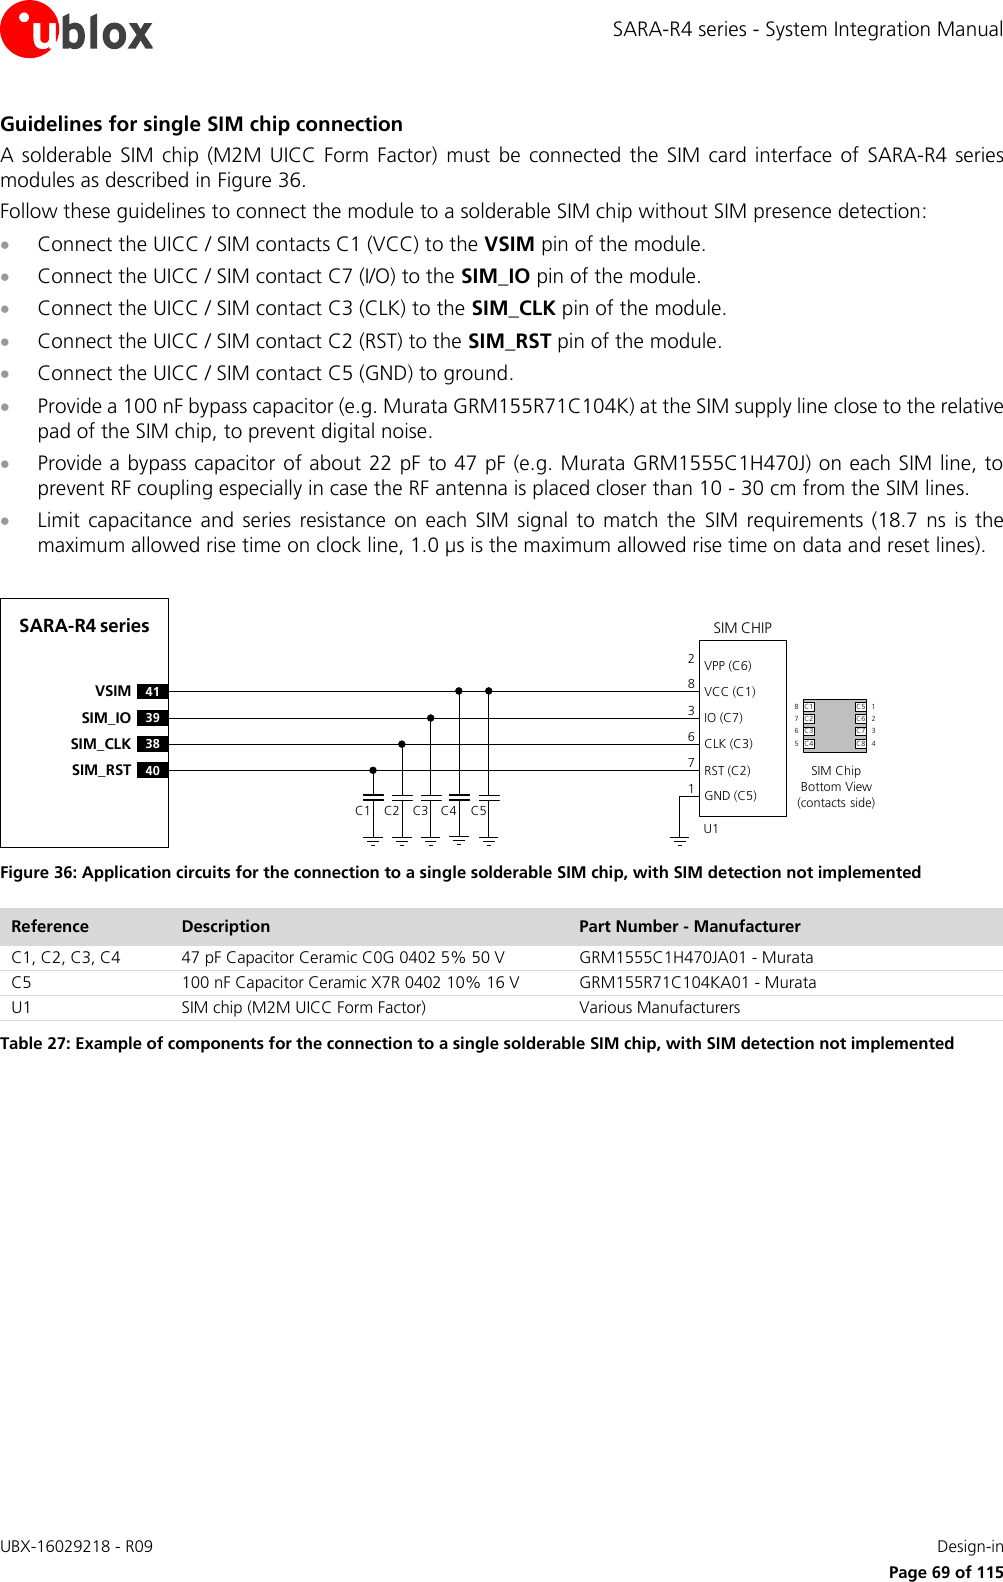 SARA-R4 series - System Integration Manual UBX-16029218 - R09    Design-in     Page 69 of 115 Guidelines for single SIM chip connection A solderable  SIM  chip  (M2M UICC Form Factor)  must be  connected  the SIM card interface  of  SARA-R4  series modules as described in Figure 36. Follow these guidelines to connect the module to a solderable SIM chip without SIM presence detection:  Connect the UICC / SIM contacts C1 (VCC) to the VSIM pin of the module.  Connect the UICC / SIM contact C7 (I/O) to the SIM_IO pin of the module.  Connect the UICC / SIM contact C3 (CLK) to the SIM_CLK pin of the module.  Connect the UICC / SIM contact C2 (RST) to the SIM_RST pin of the module.  Connect the UICC / SIM contact C5 (GND) to ground.  Provide a 100 nF bypass capacitor (e.g. Murata GRM155R71C104K) at the SIM supply line close to the relative pad of the SIM chip, to prevent digital noise.   Provide a bypass capacitor of about 22 pF to 47 pF (e.g. Murata GRM1555C1H470J) on each SIM line, to prevent RF coupling especially in case the RF antenna is placed closer than 10 - 30 cm from the SIM lines.  Limit capacitance  and  series  resistance on each  SIM  signal to match the  SIM  requirements (18.7  ns  is the maximum allowed rise time on clock line, 1.0 µs is the maximum allowed rise time on data and reset lines).  SARA-R4 series41VSIM39SIM_IO38SIM_CLK40SIM_RSTSIM CHIPSIM ChipBottom View (contacts side)C1VPP (C6)VCC (C1)IO (C7)CLK (C3)RST (C2)GND (C5)C2 C3 C5U1C4283671C1 C5C2 C6C3 C7C4 C887651234 Figure 36: Application circuits for the connection to a single solderable SIM chip, with SIM detection not implemented Reference Description Part Number - Manufacturer C1, C2, C3, C4 47 pF Capacitor Ceramic C0G 0402 5% 50 V GRM1555C1H470JA01 - Murata C5 100 nF Capacitor Ceramic X7R 0402 10% 16 V GRM155R71C104KA01 - Murata U1 SIM chip (M2M UICC Form Factor) Various Manufacturers Table 27: Example of components for the connection to a single solderable SIM chip, with SIM detection not implemented  